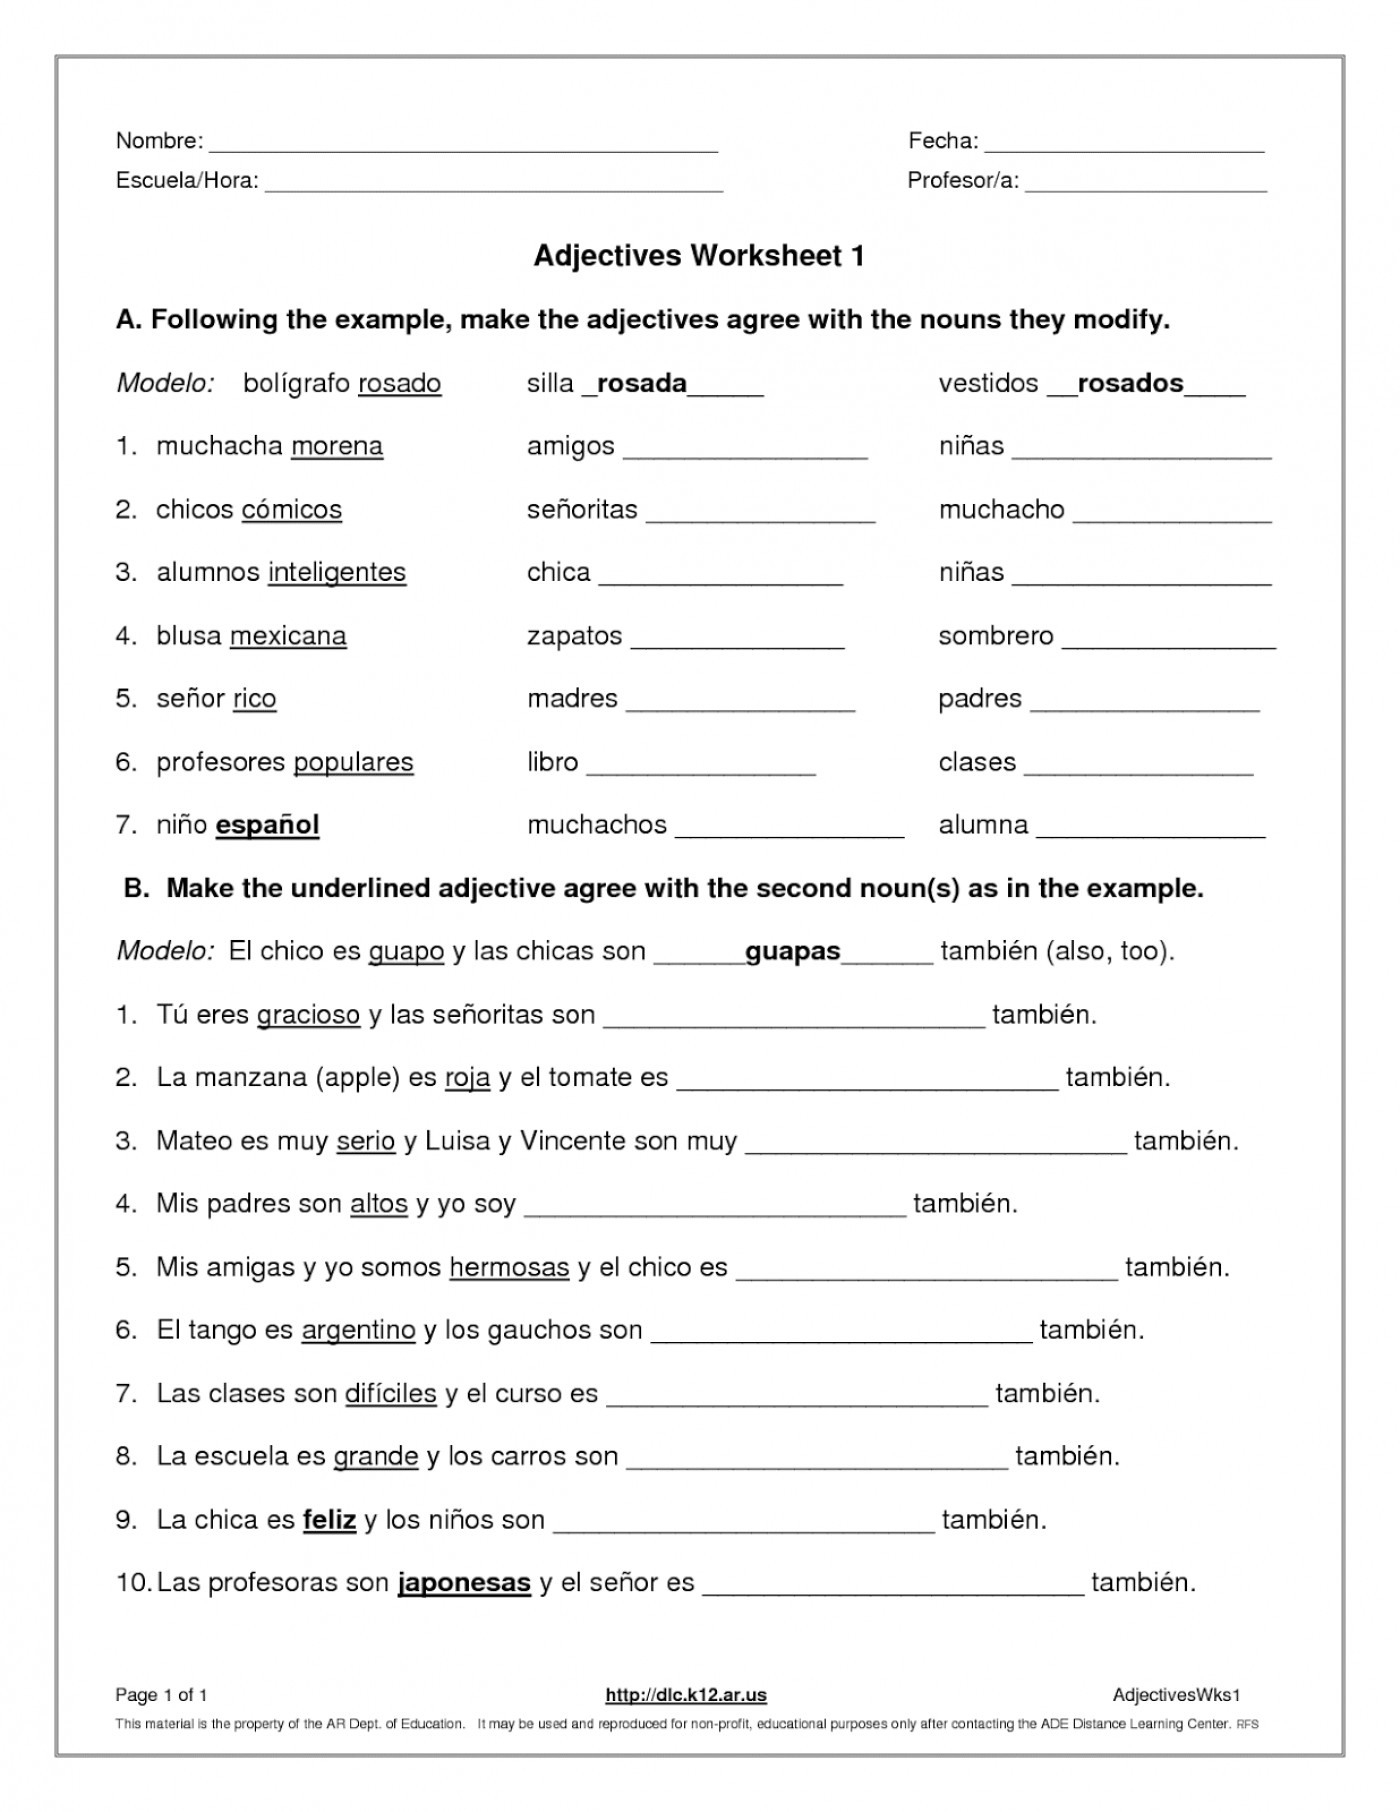 Spanish Worksheet Answers Db excel